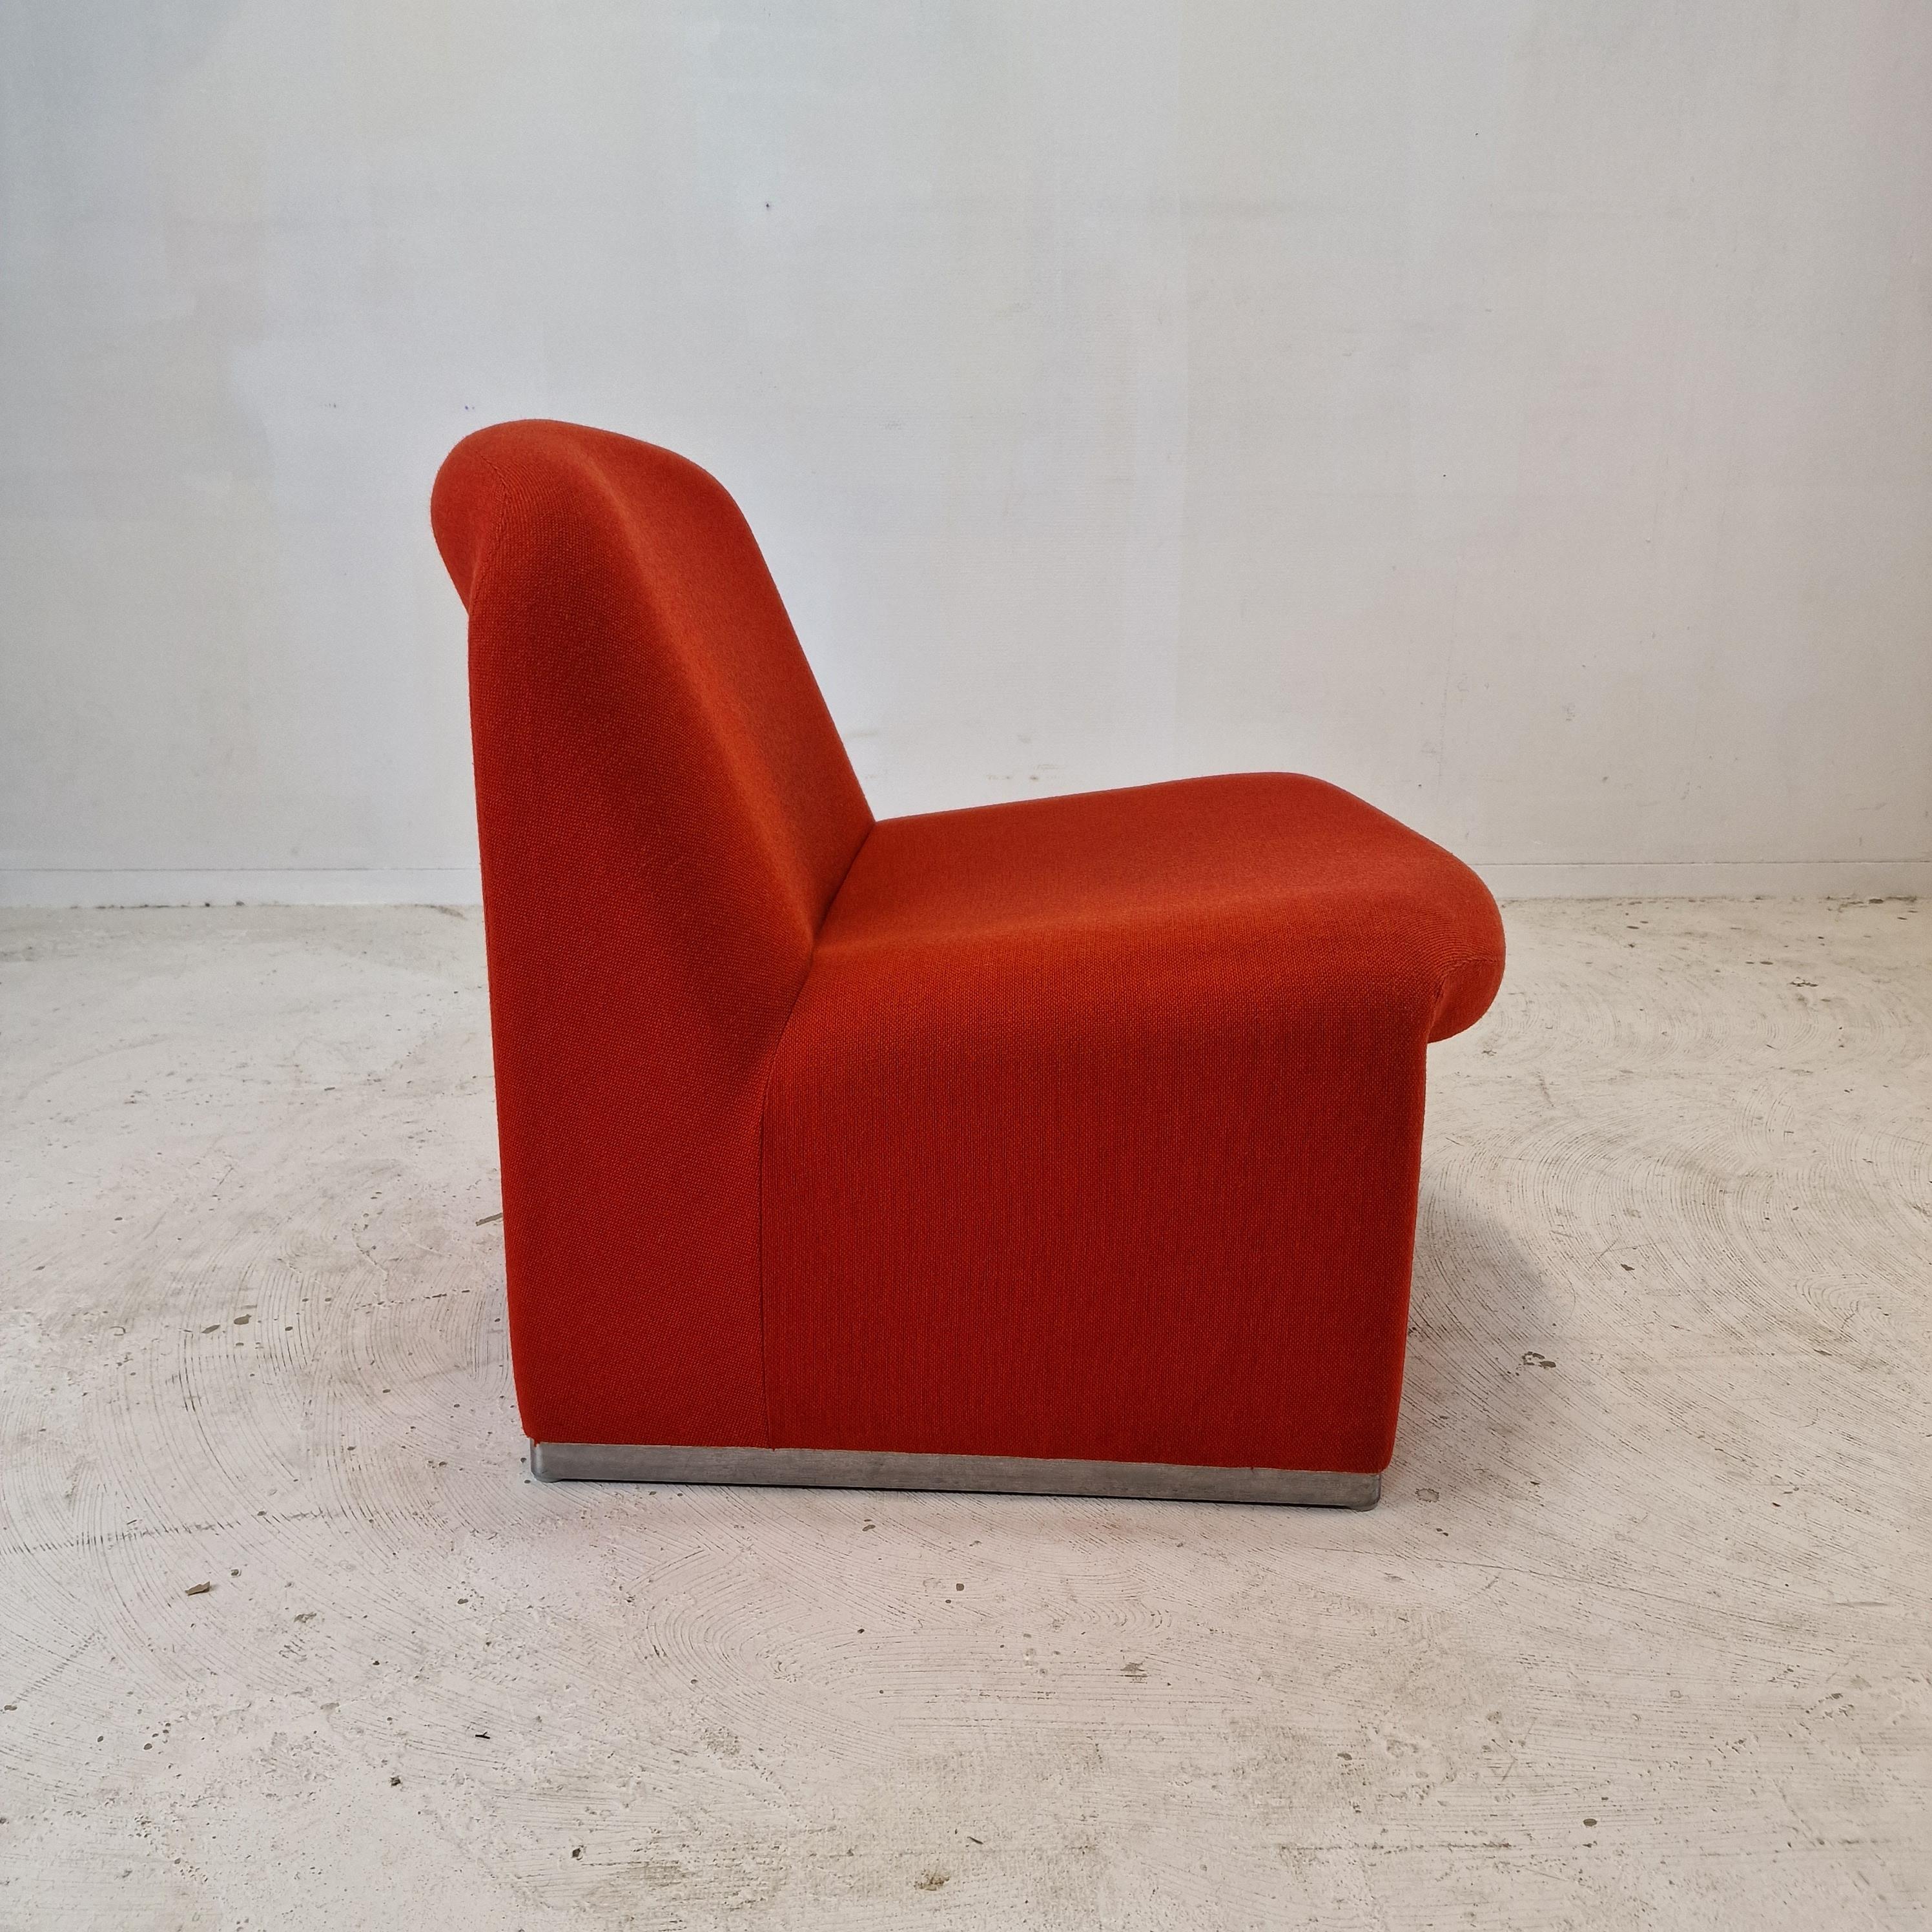 Aluminum Alky Lounge Chair by Giancarlo Piretti for Castelli, 1980s For Sale